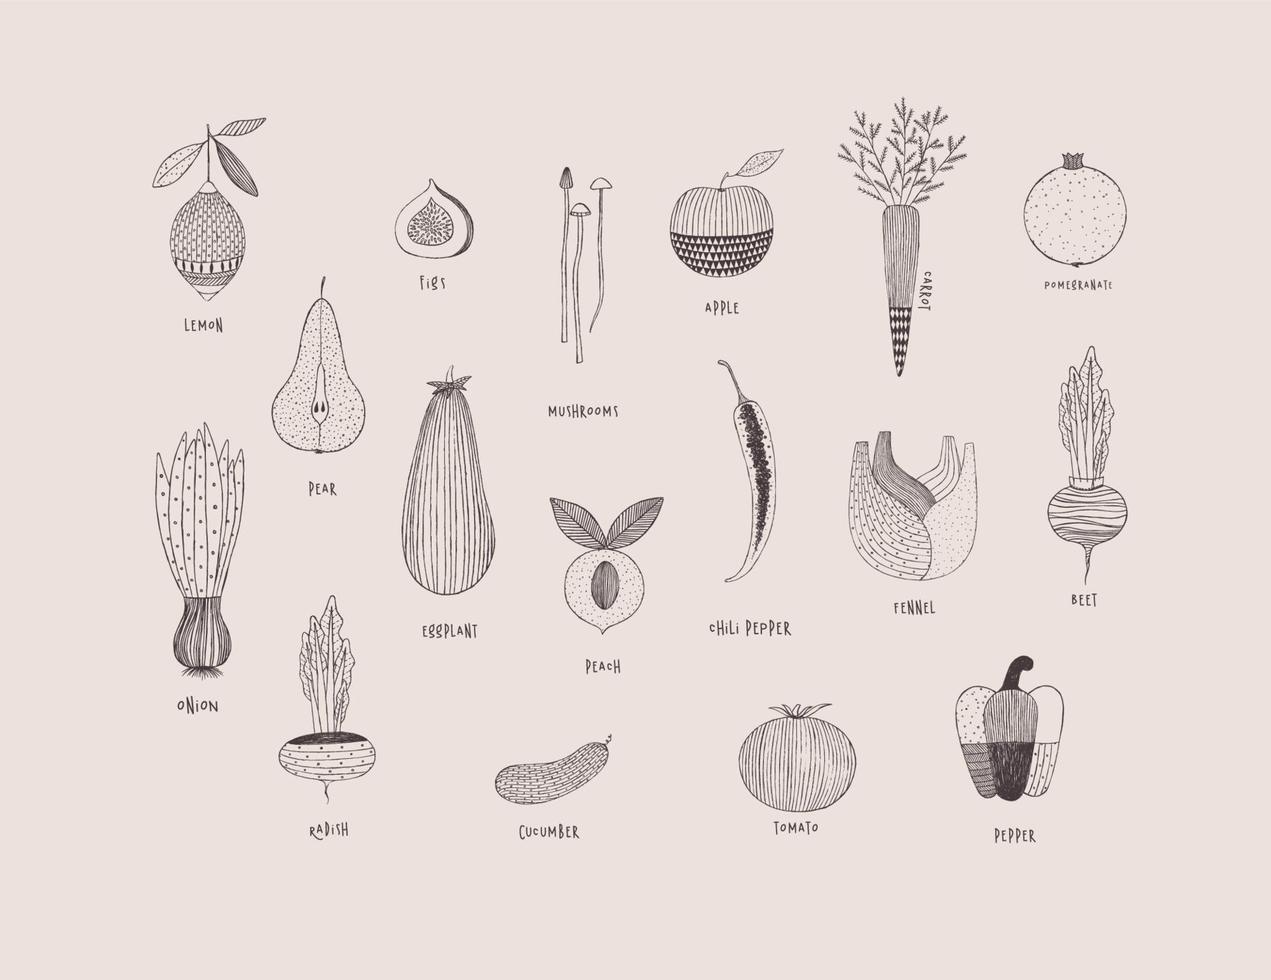 Fruits and vegetables in hand drawn ornament style lemon, pear, figs, mushrooms, apple, carrot, pomegranate, onion, eggplant, peach, chili pepper, fennel, beet, radish cucumber tomato pepper vector